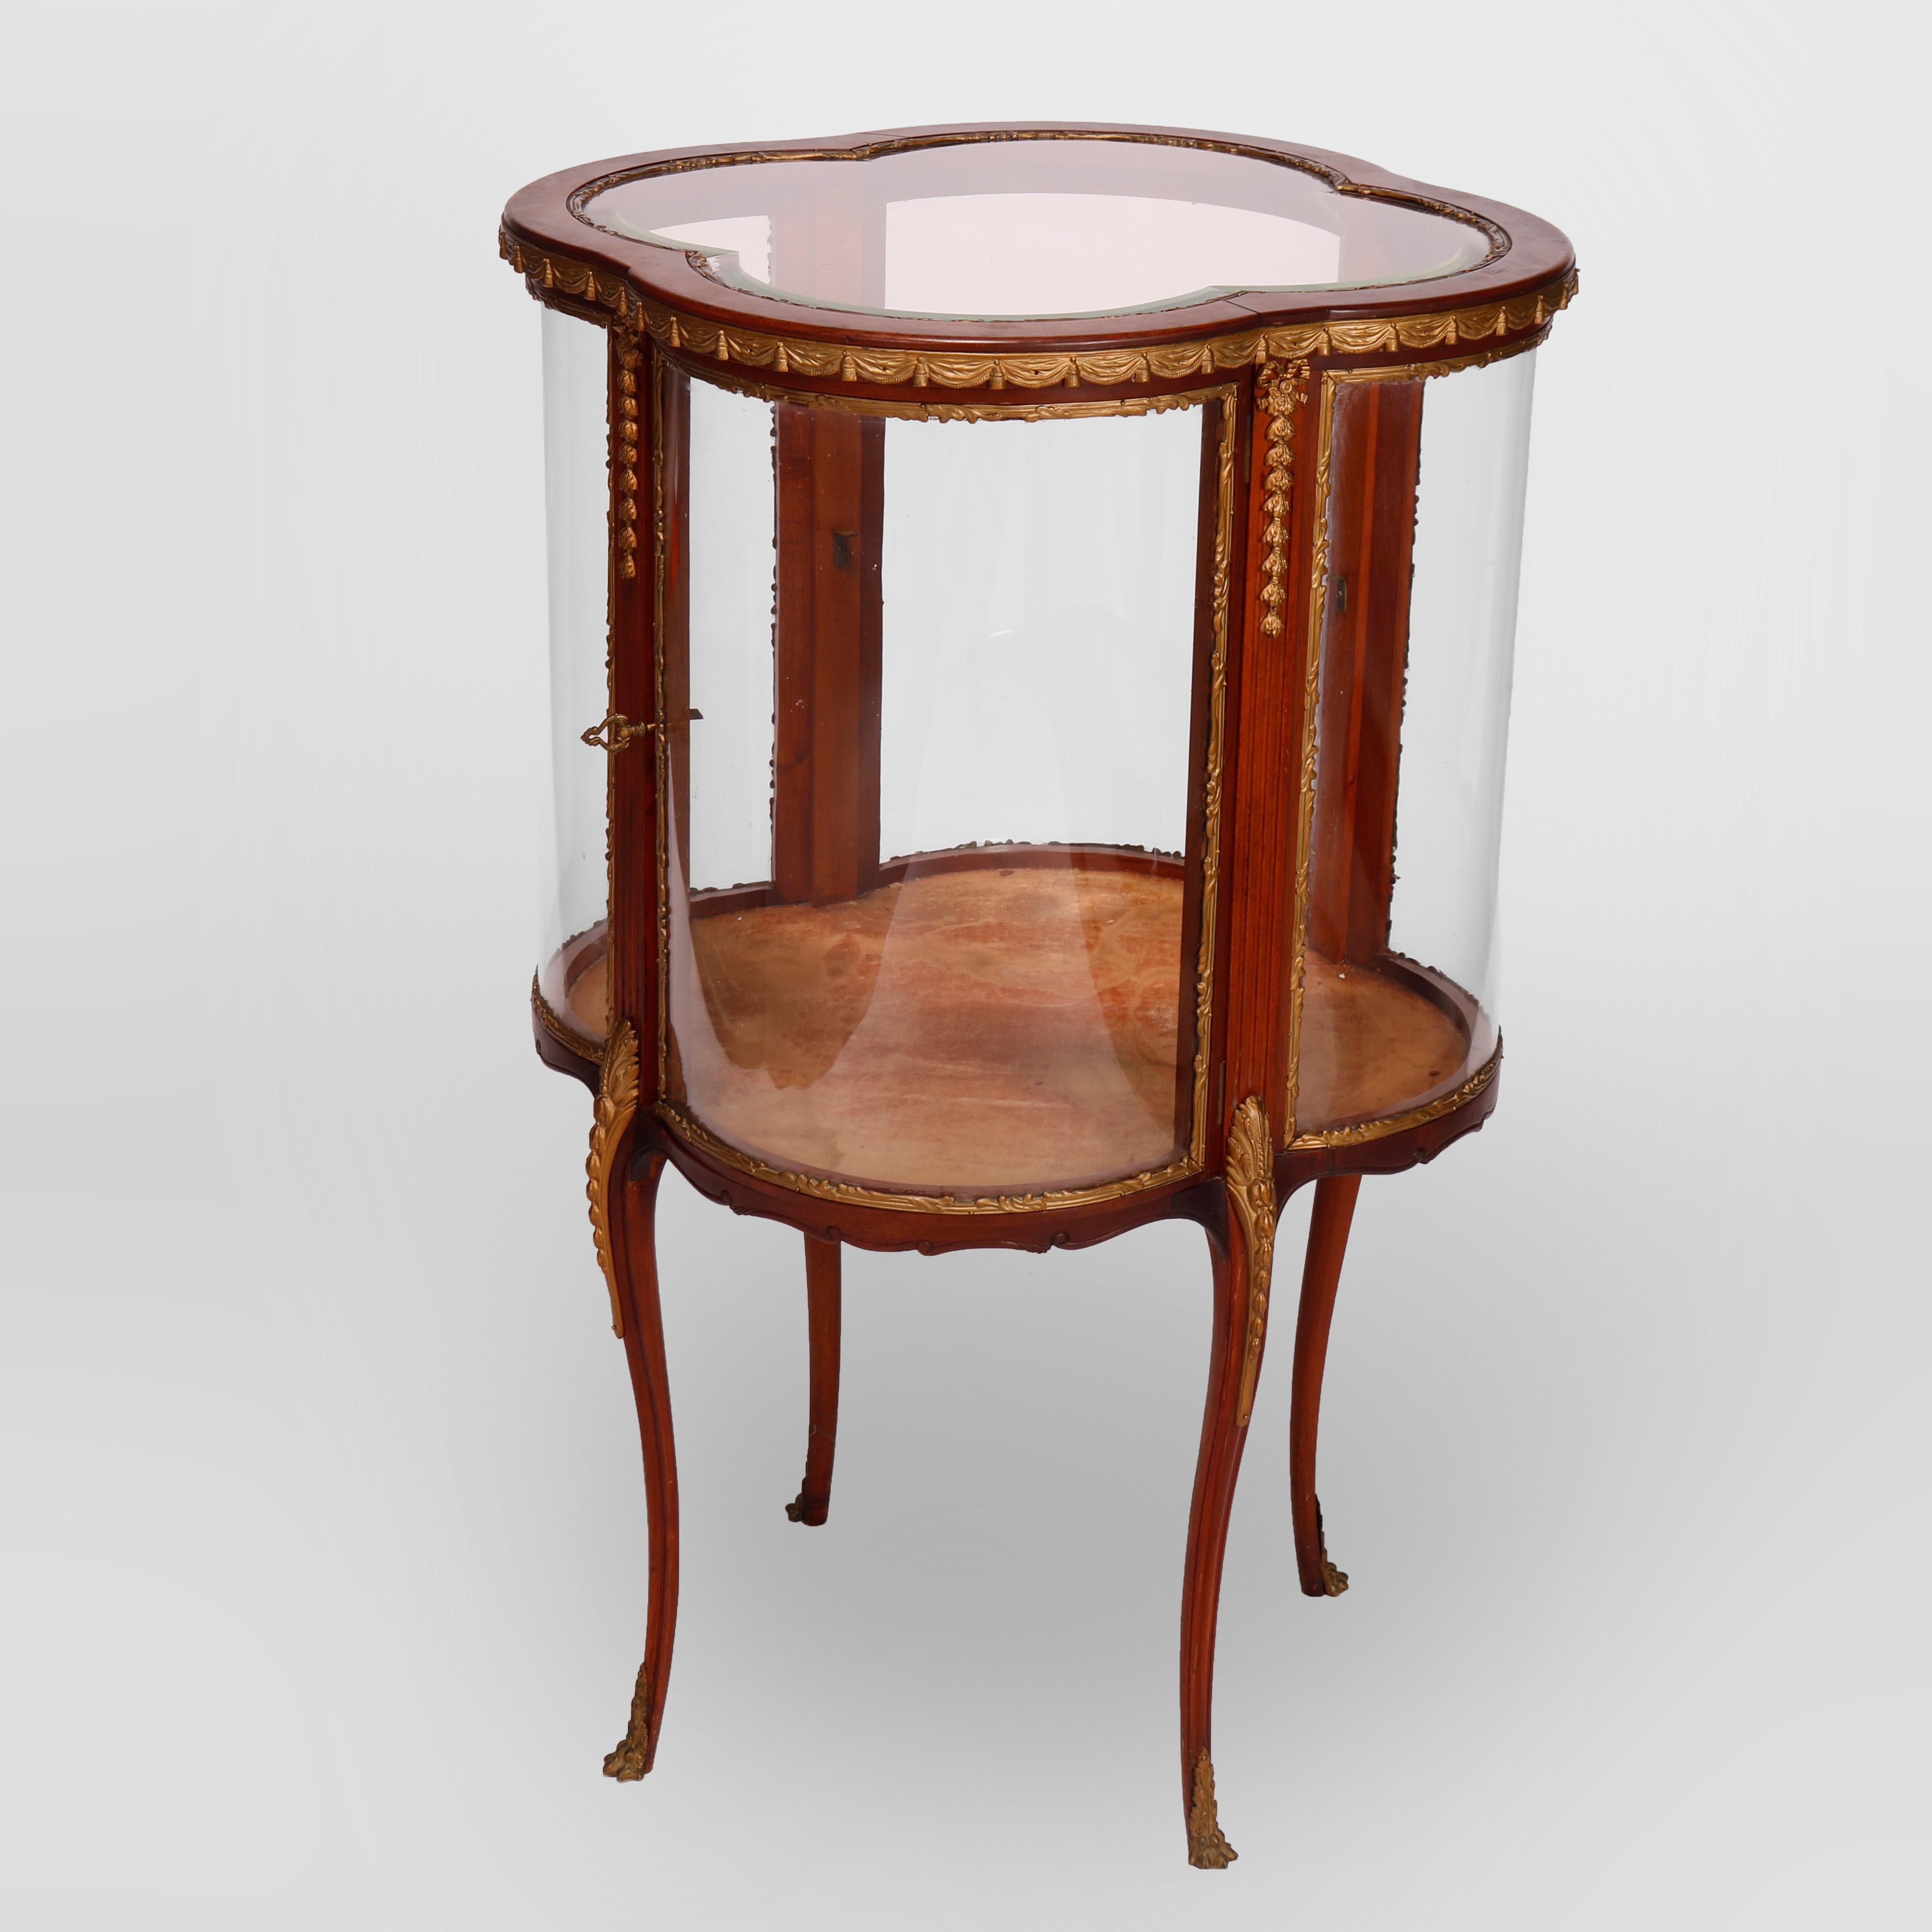 An antique French Louis XIV display vitrine offers flame mahogany frame in serpentine cloverleaf form with curved glass sides and single door, raised on cabriole legs, cast ormolu in foliate, scroll, inverted bellflower, drape and tassel form